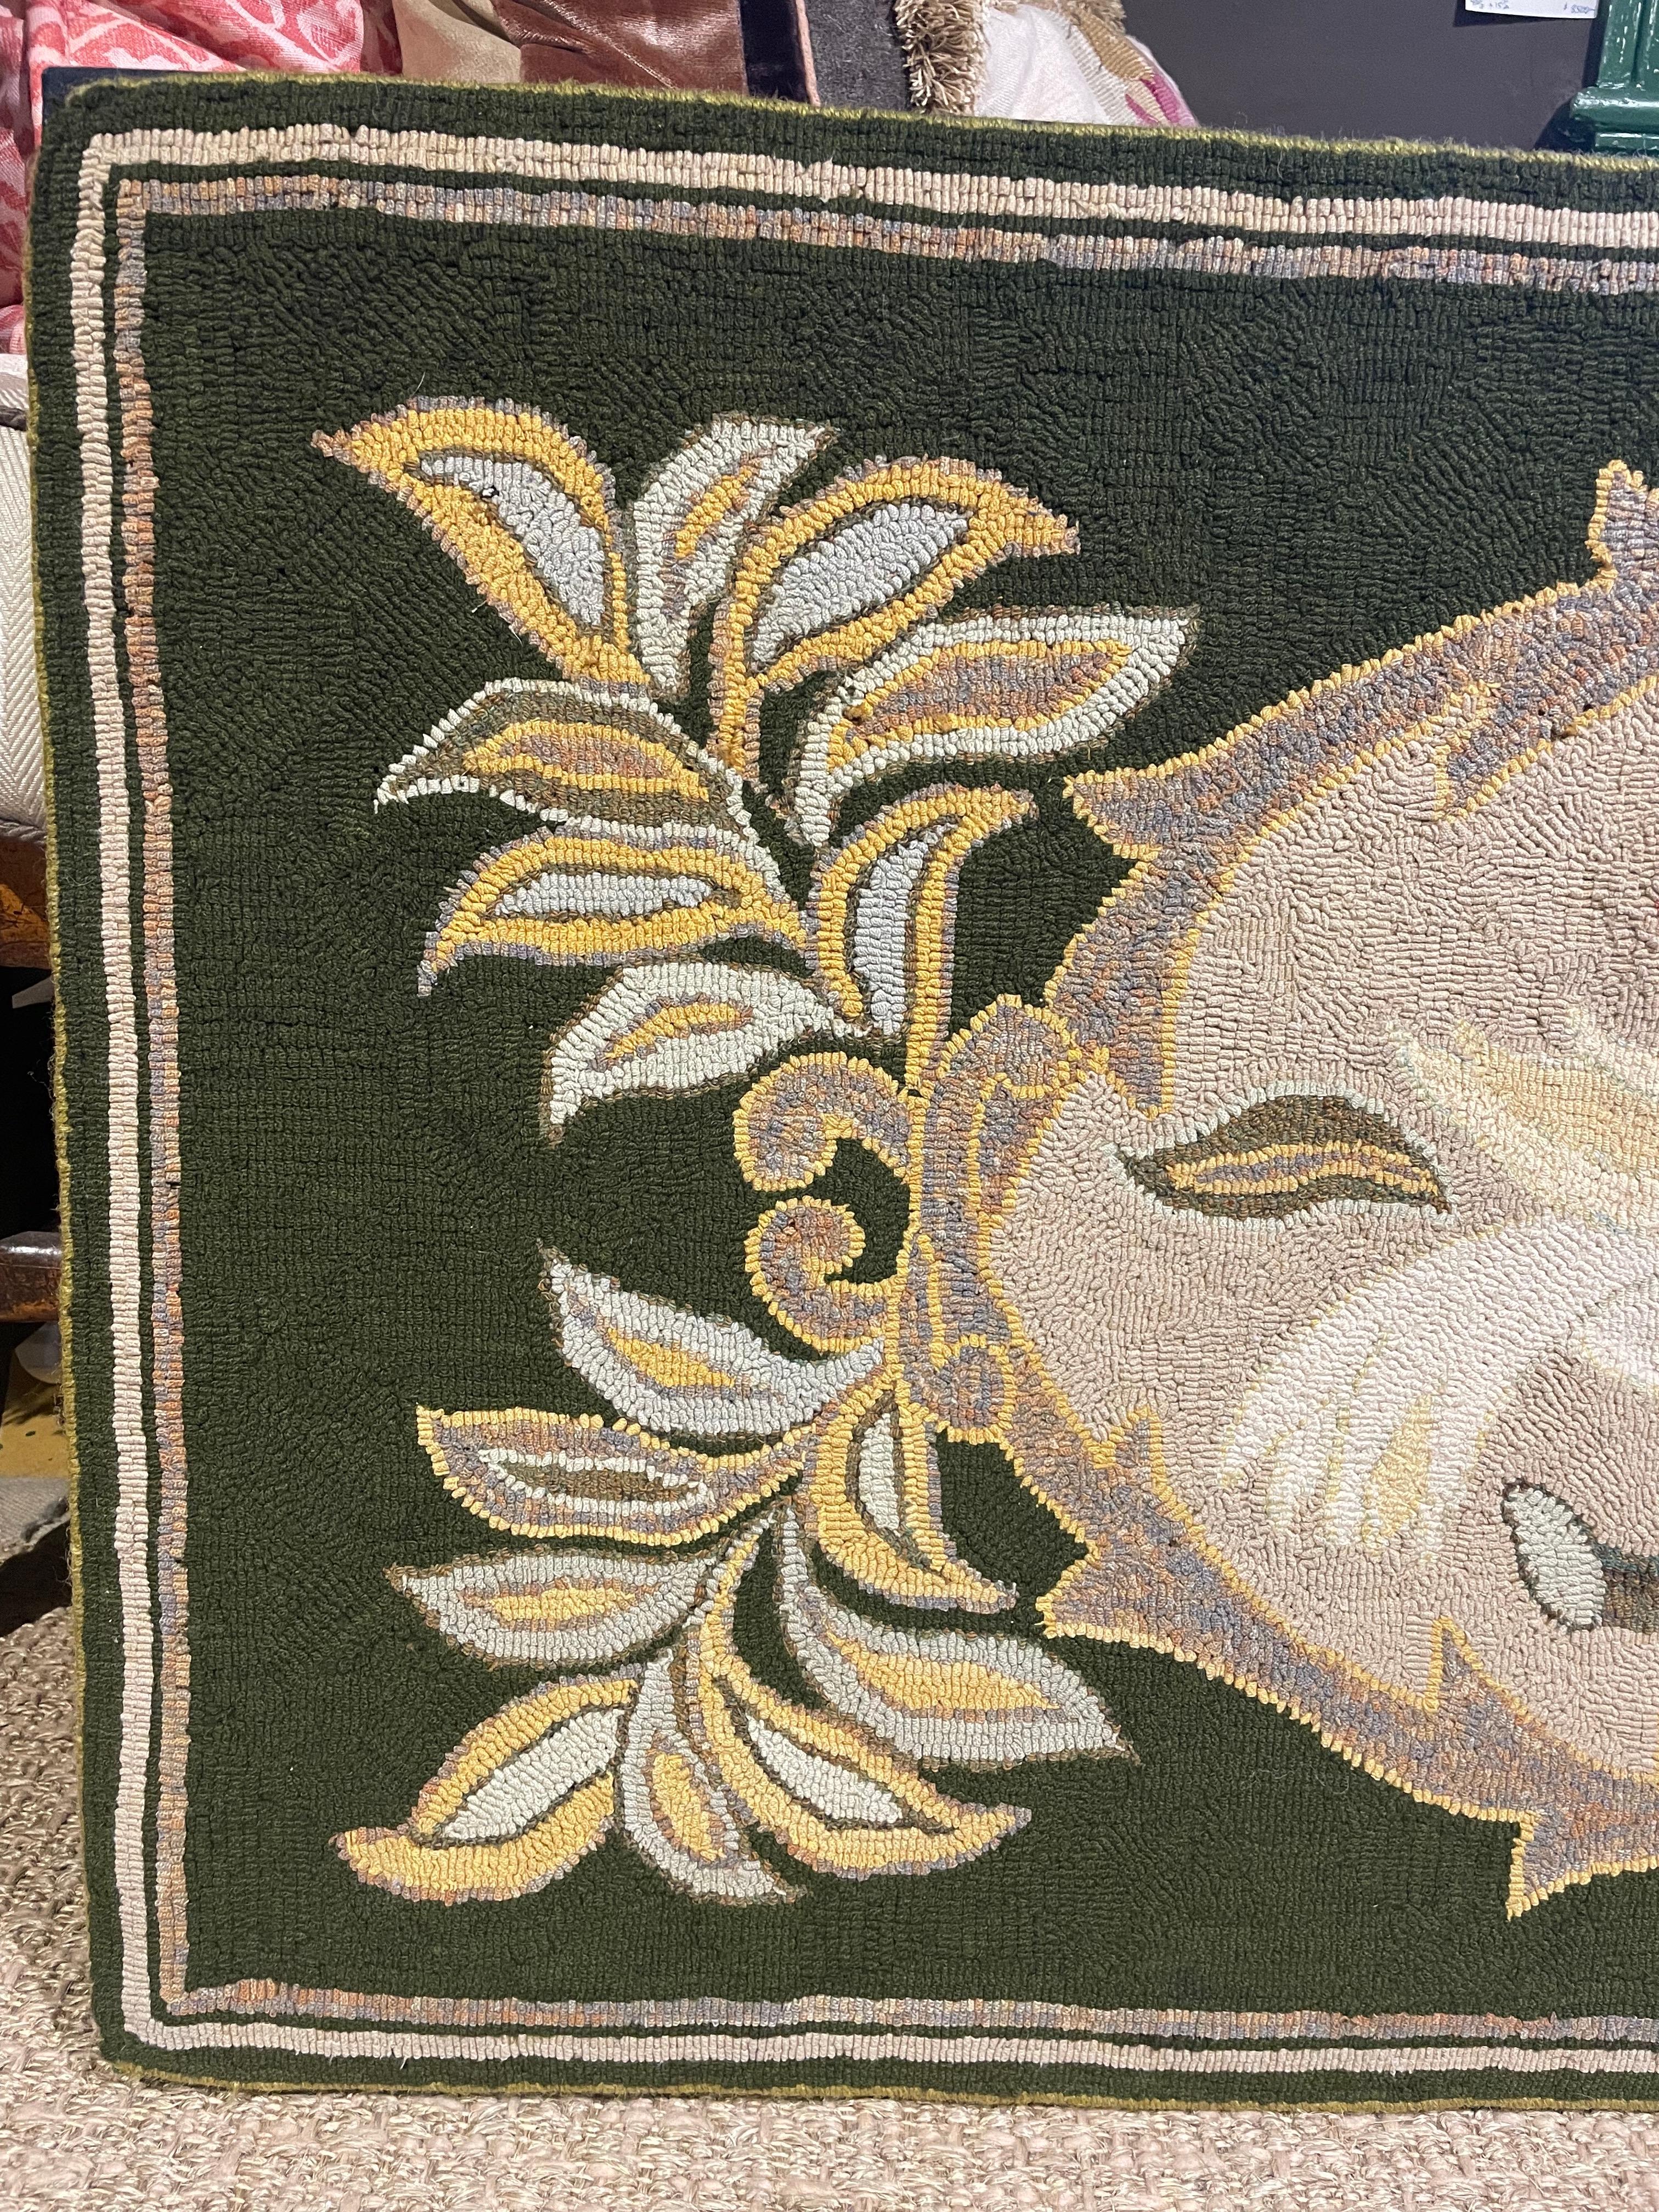 Turn of the century/early 20th century hooked rug, mounted for wall hanging on black linen and foam core stretcher. With evergreen ground and white and variegated striped border. Central medallion flanked with vegetal designs in